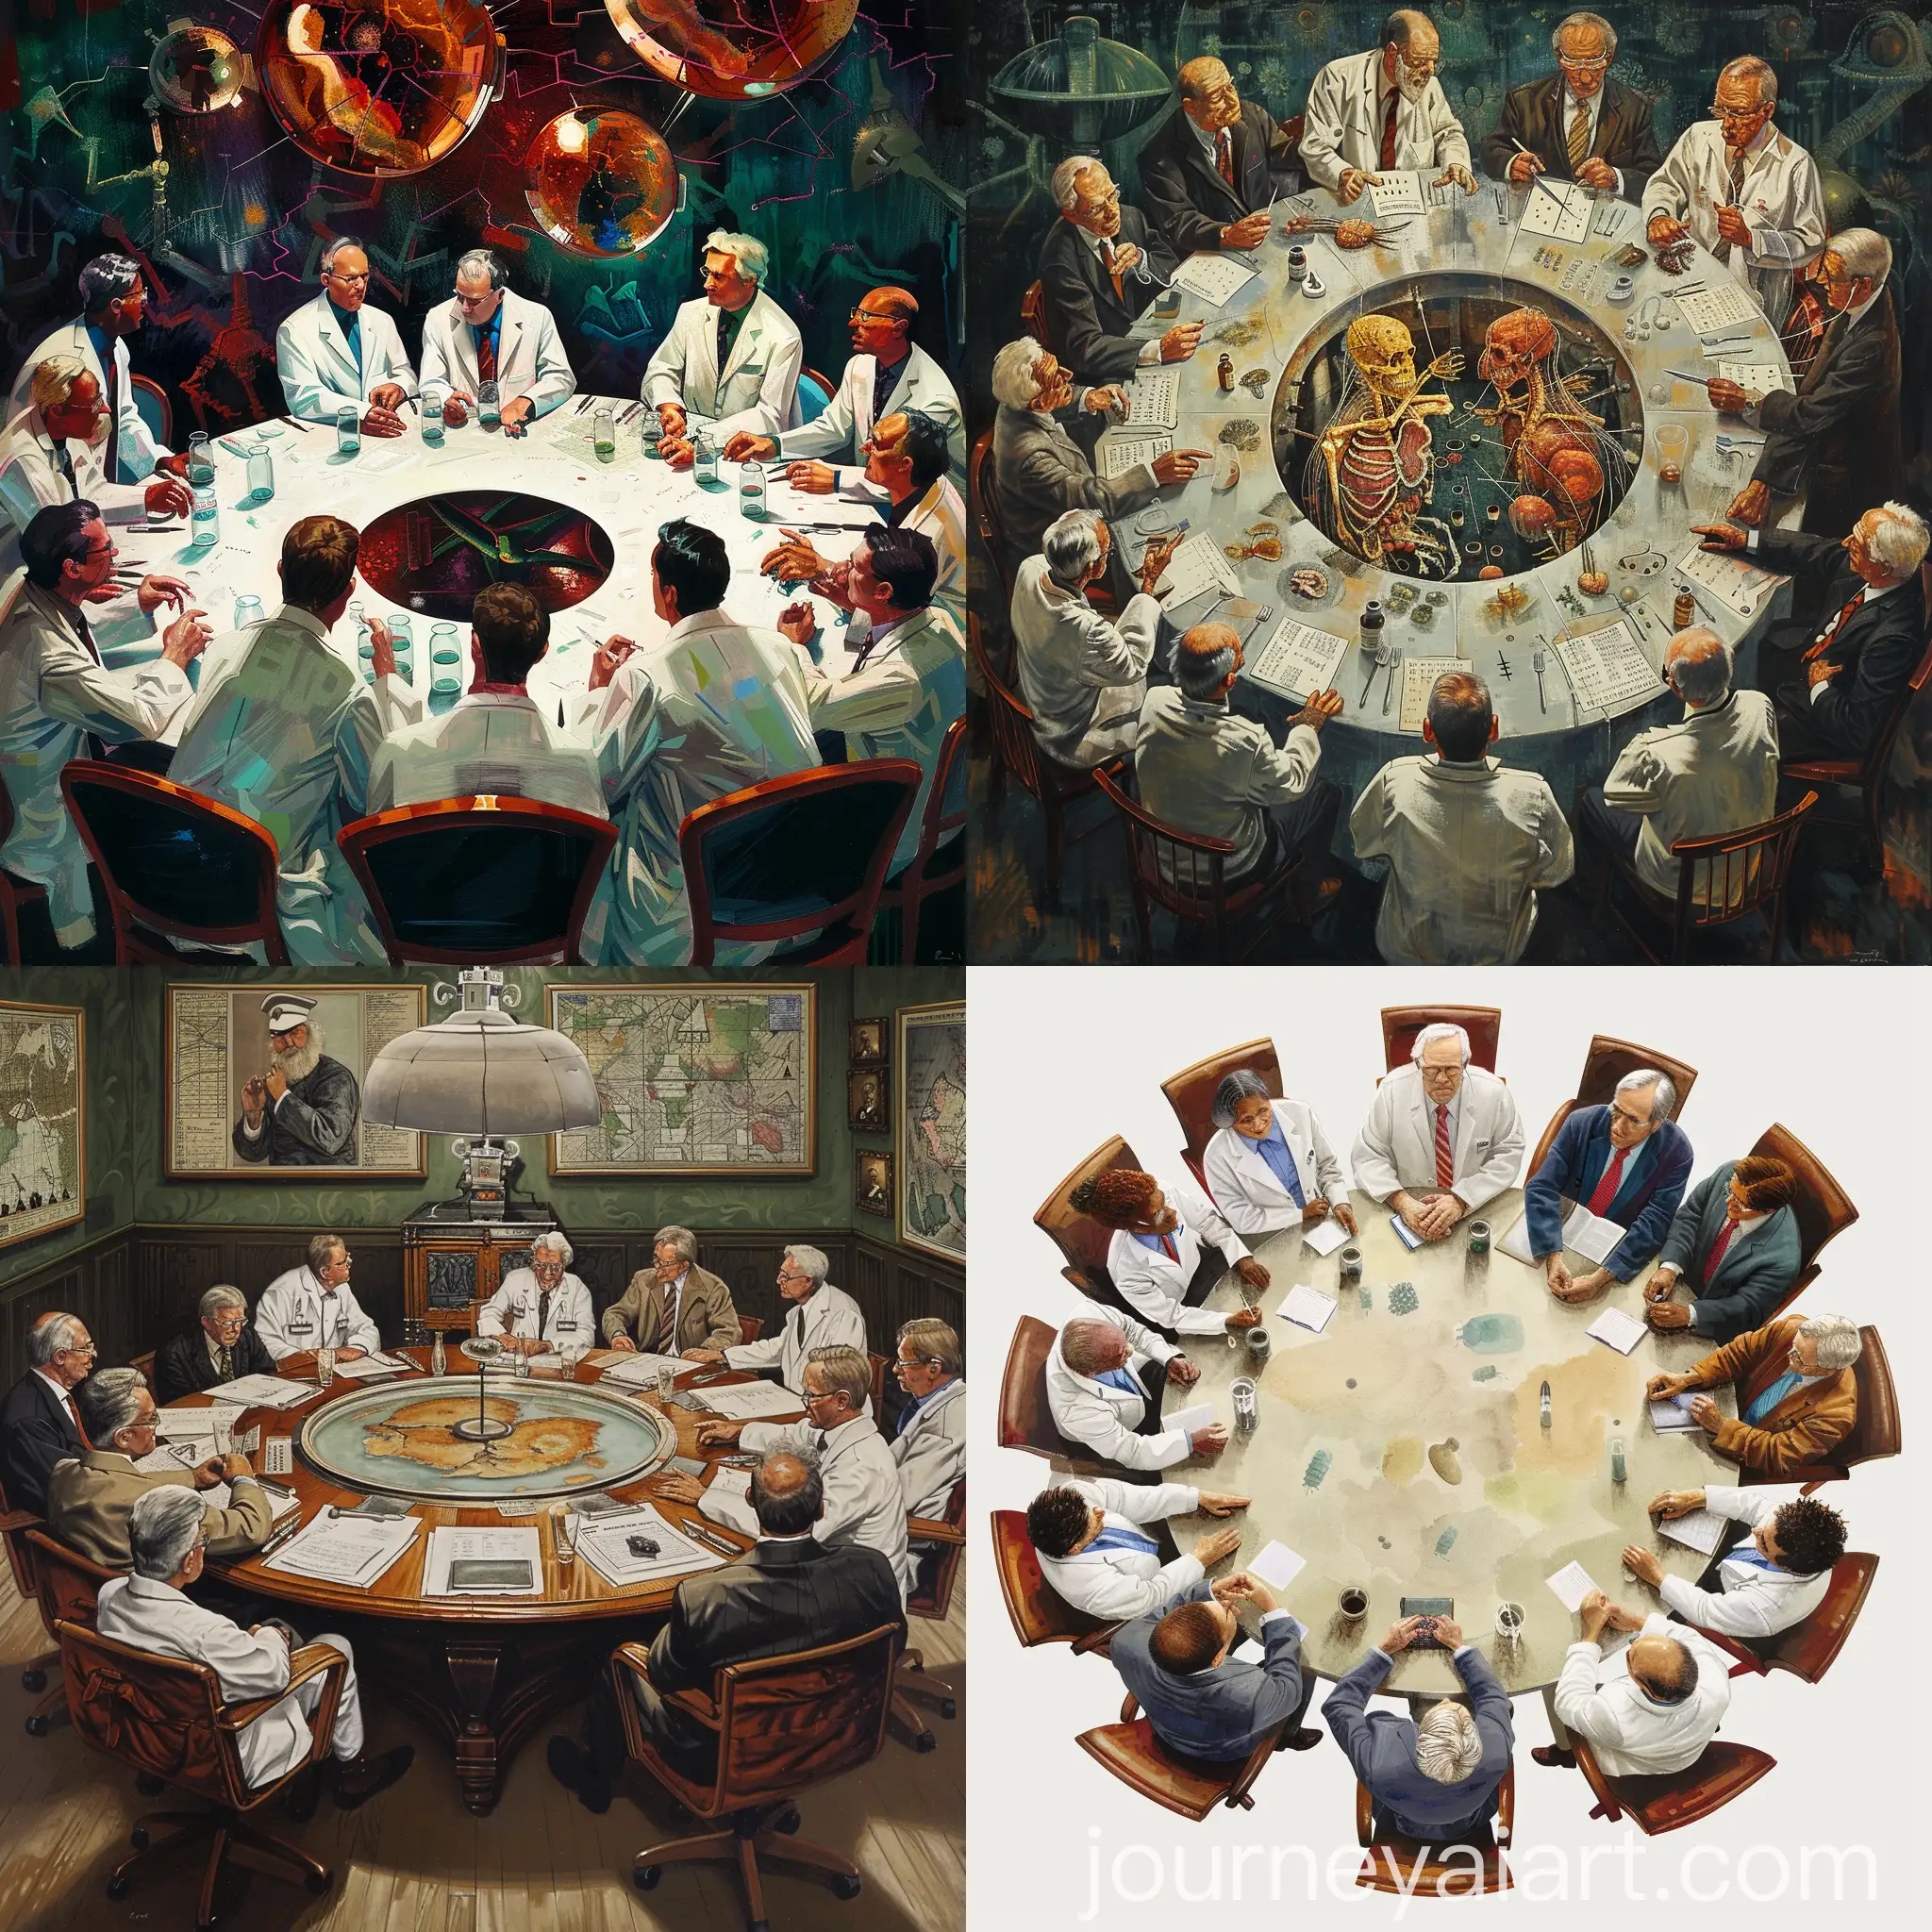 Roundtable-Discussion-of-Doctors-and-Scientists-in-Modern-Laboratory-Setting